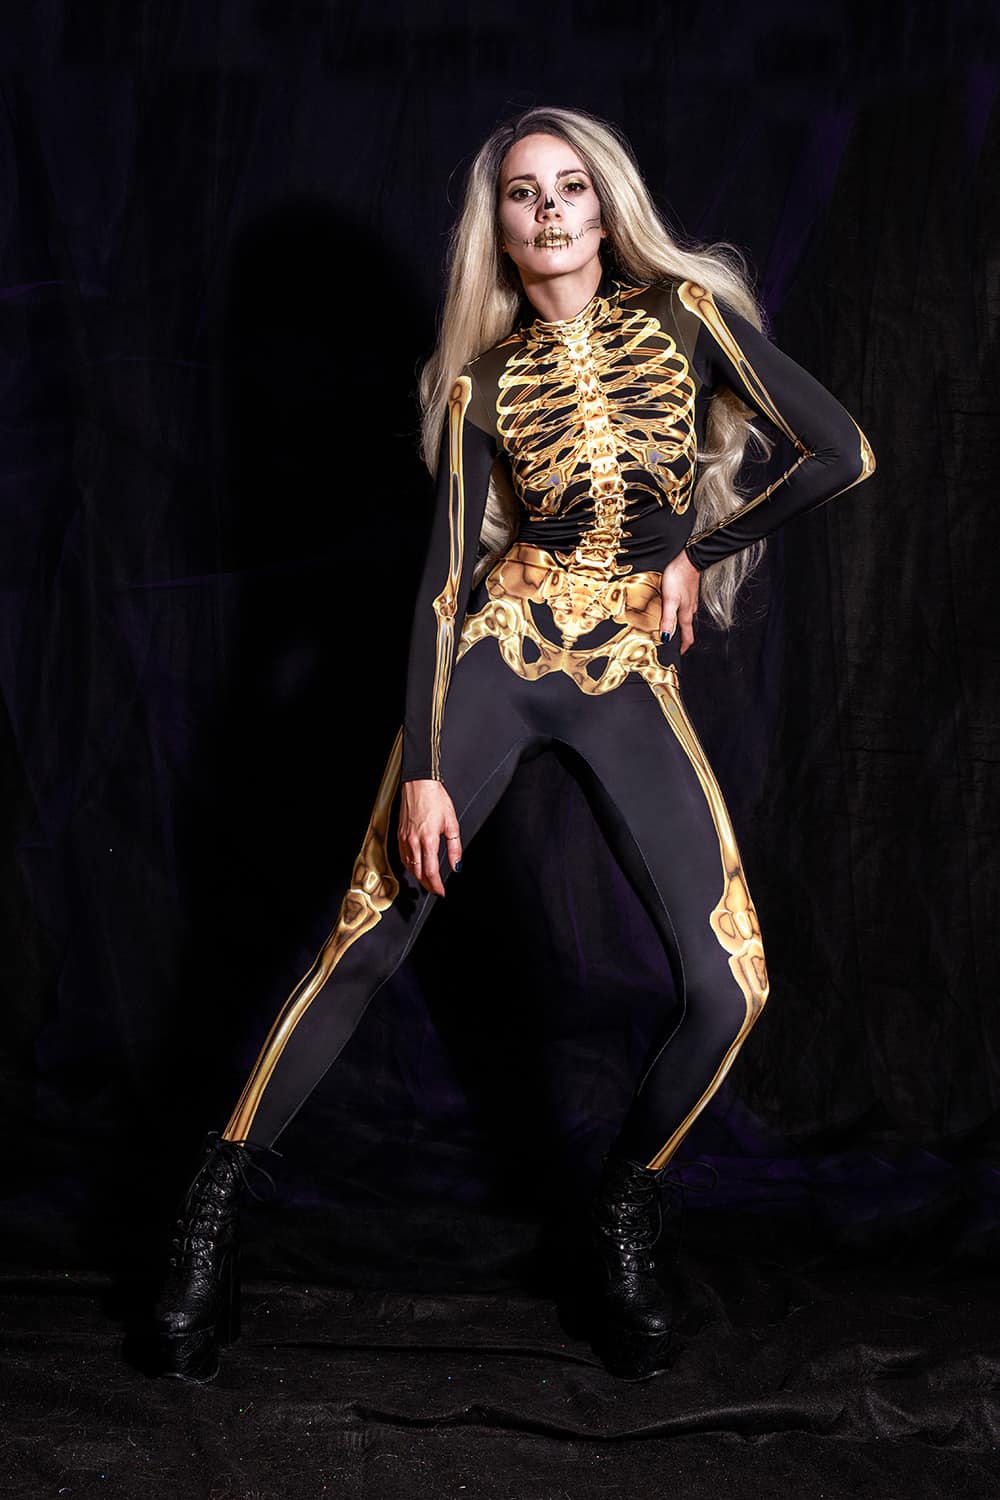 The Sexiest Scary Women's Costumes You Need This Halloween